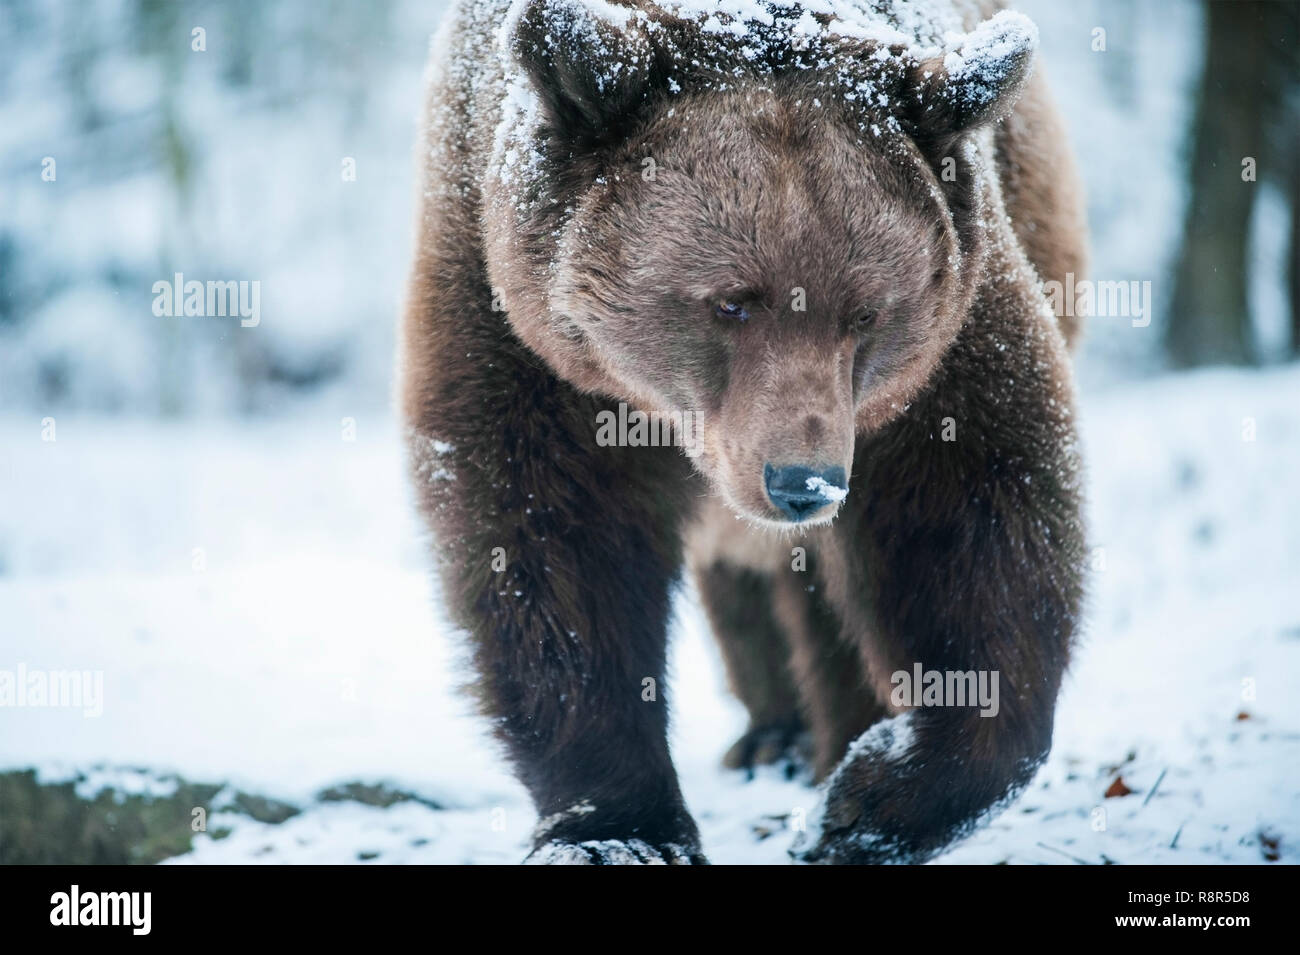 Portrait of Brown Bear in Winter Nature. Stock Photo